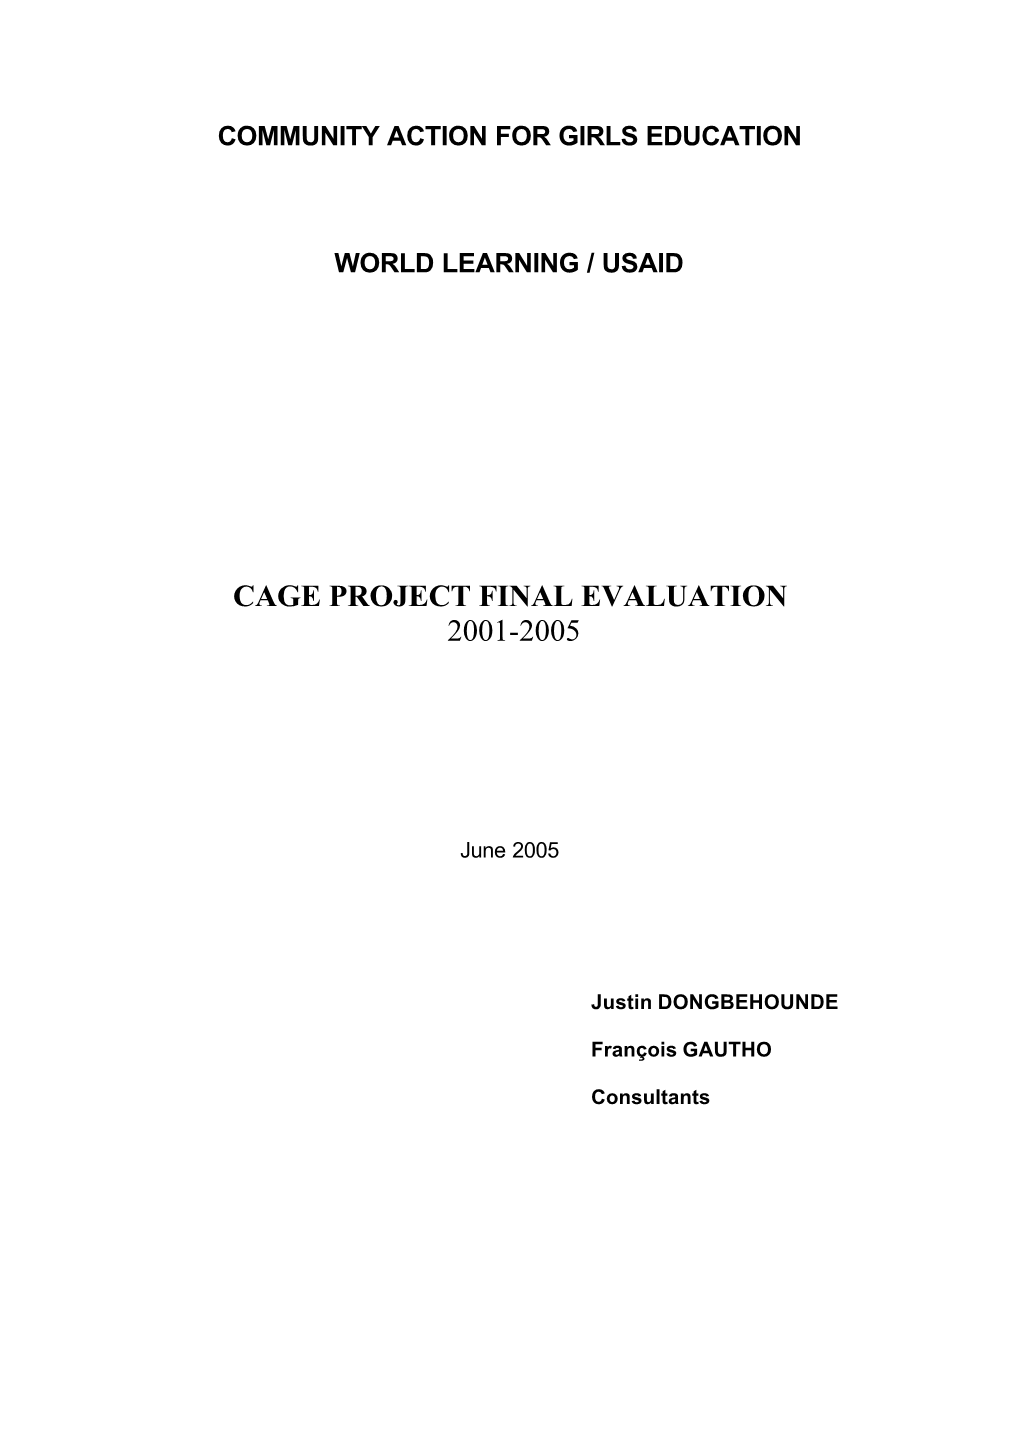 Cage Project Final Evaluation 2001-2005